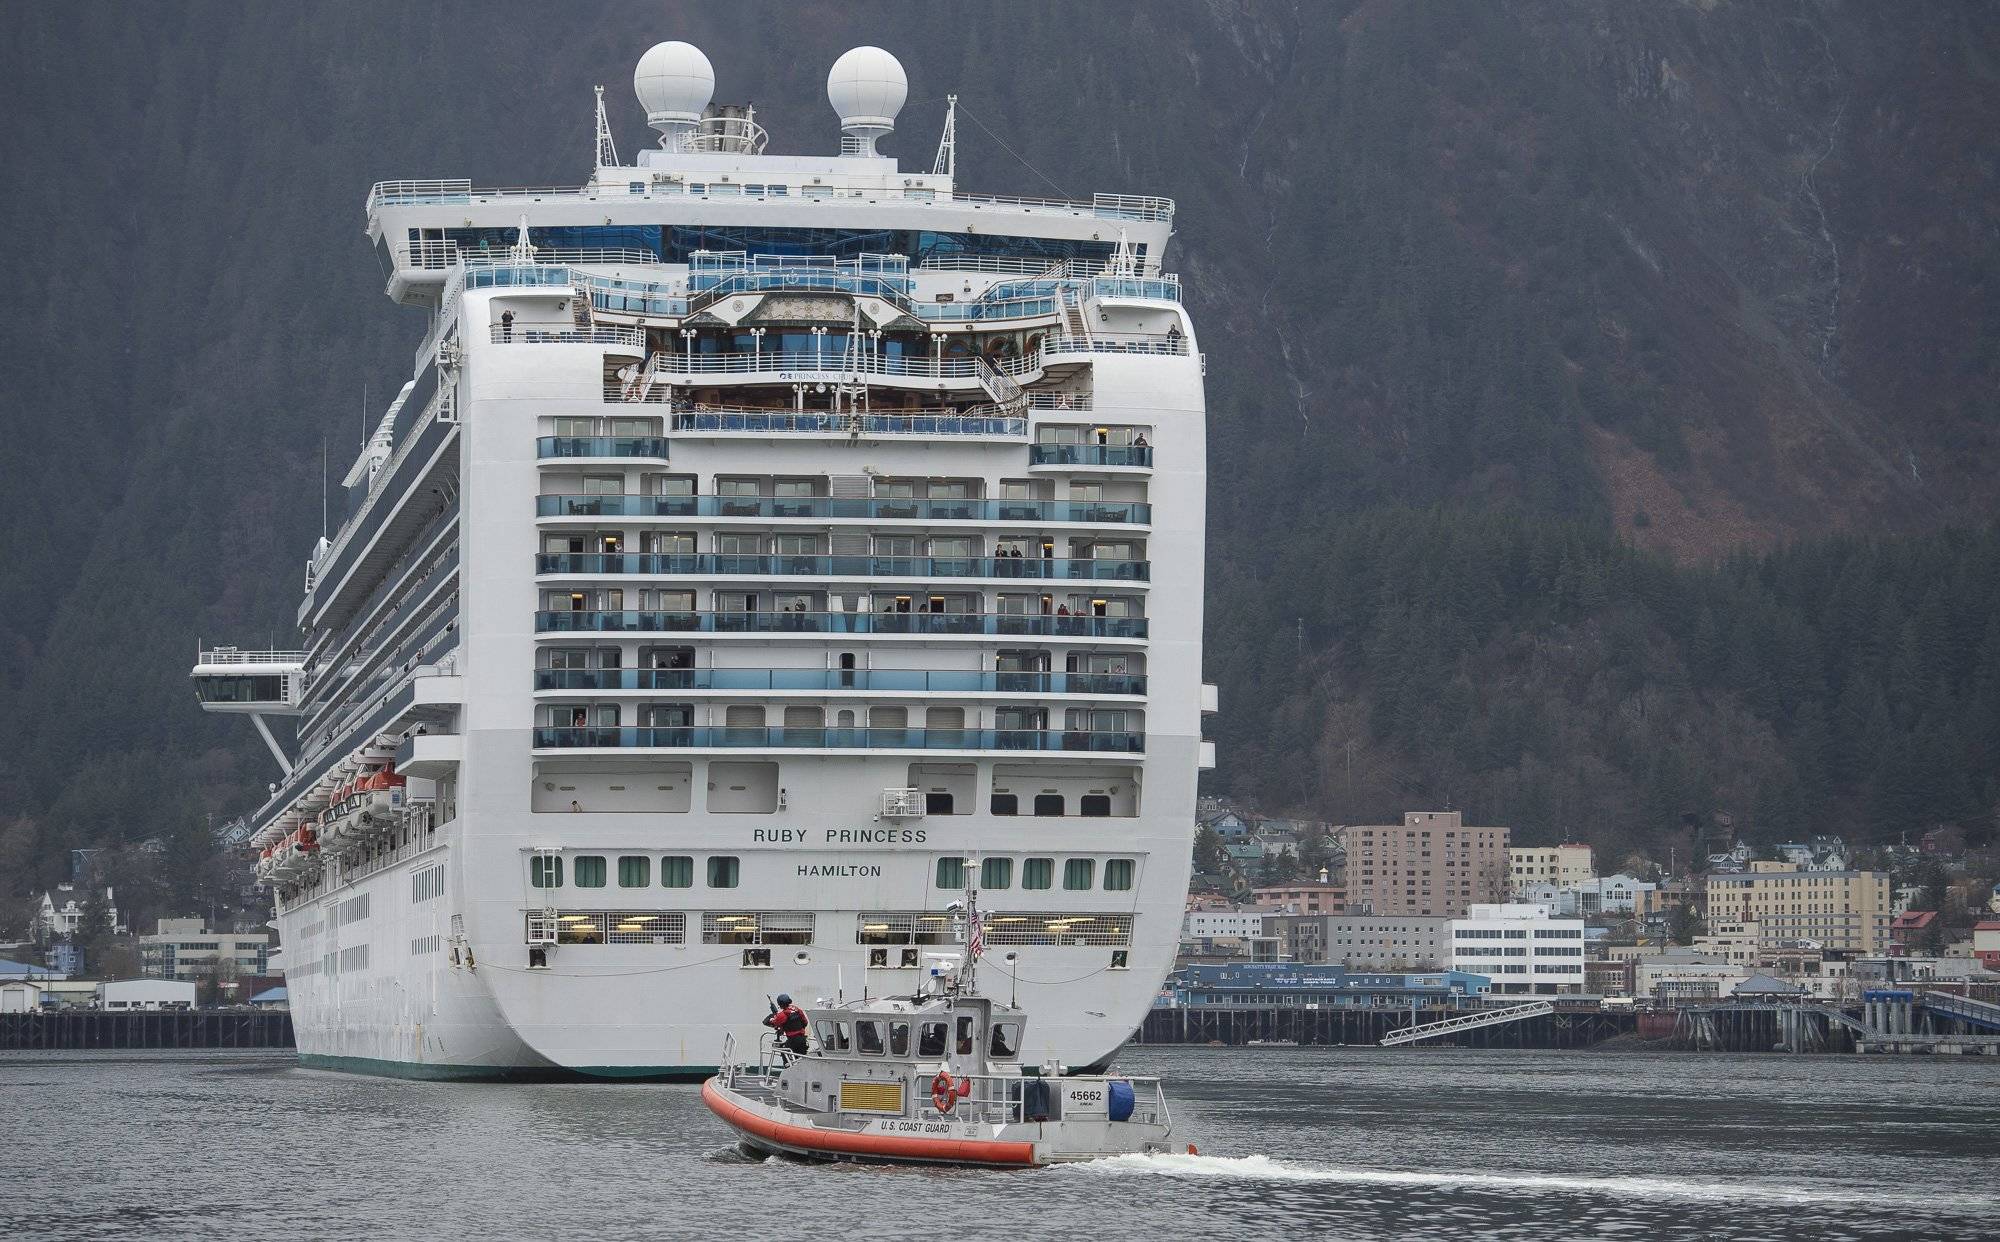 Opinion: The costs of cruise ship tourism